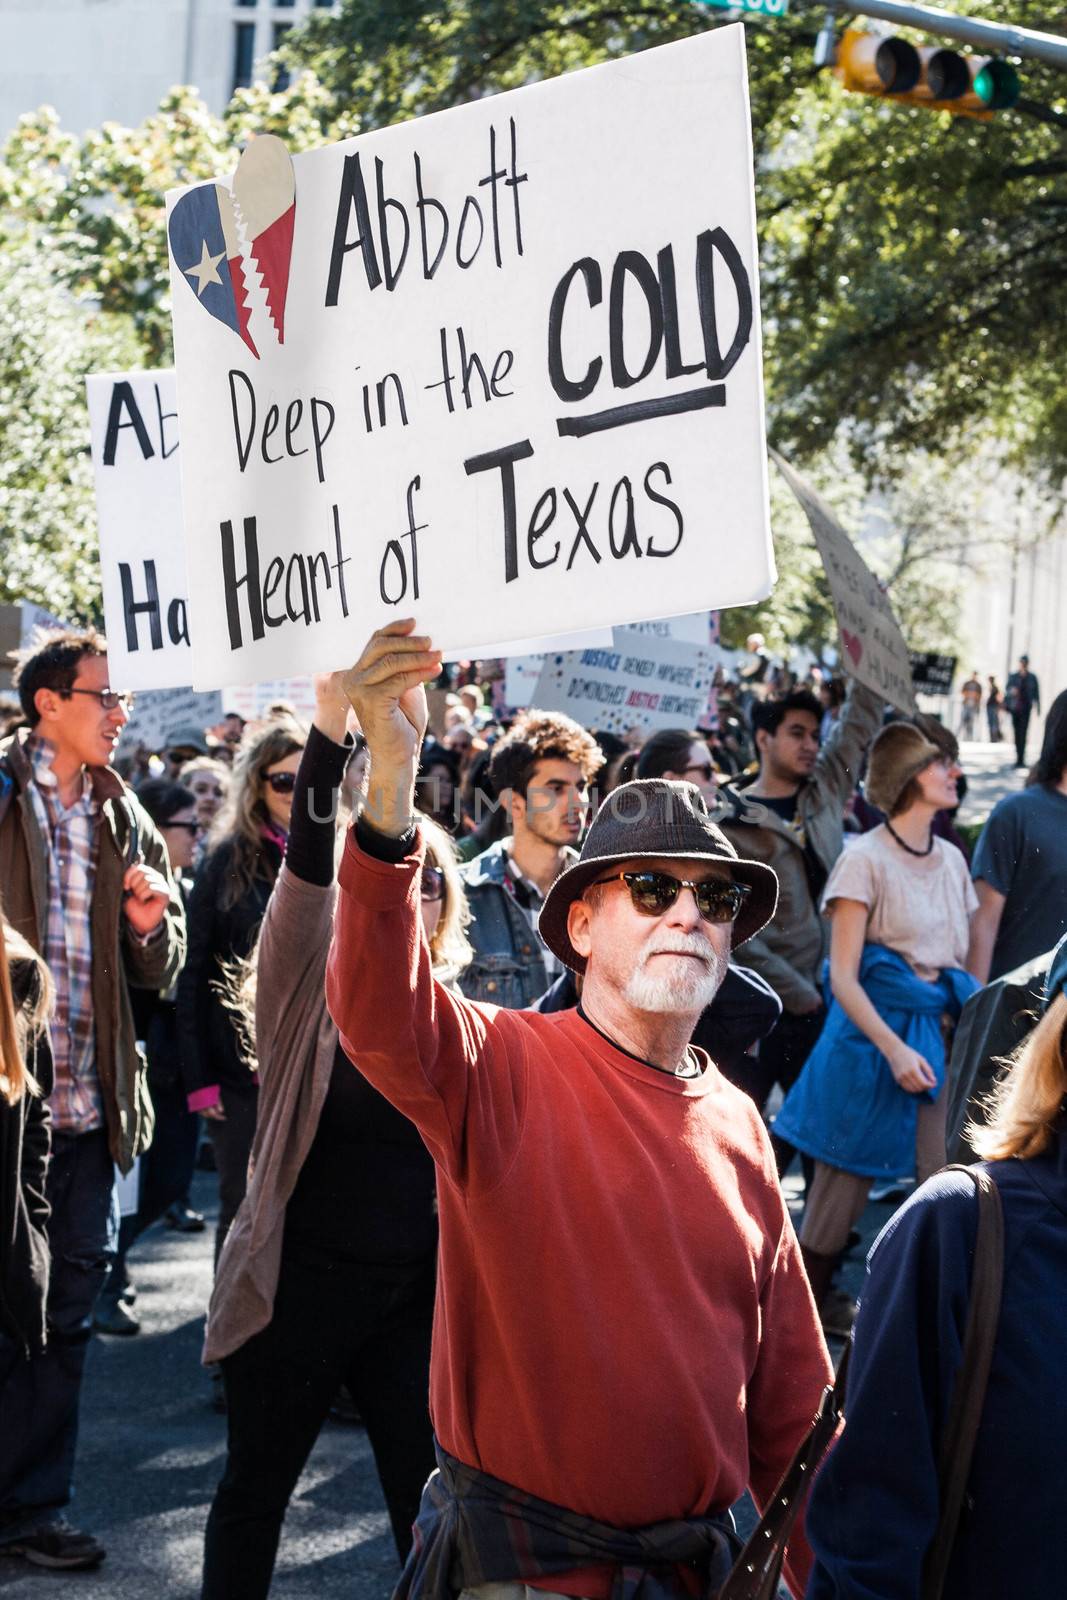 UNITED STATES, Austin: Texans voice their anger at governor Greg Abbott's attempts to stop Syrian refugees from resettling in the state at a protest in Austin on November 22, 2015. Last week Abbott joined more than half the nation's 50 governors in vowing to refuse Syrian refugees entry following the terror attacks in Paris. 